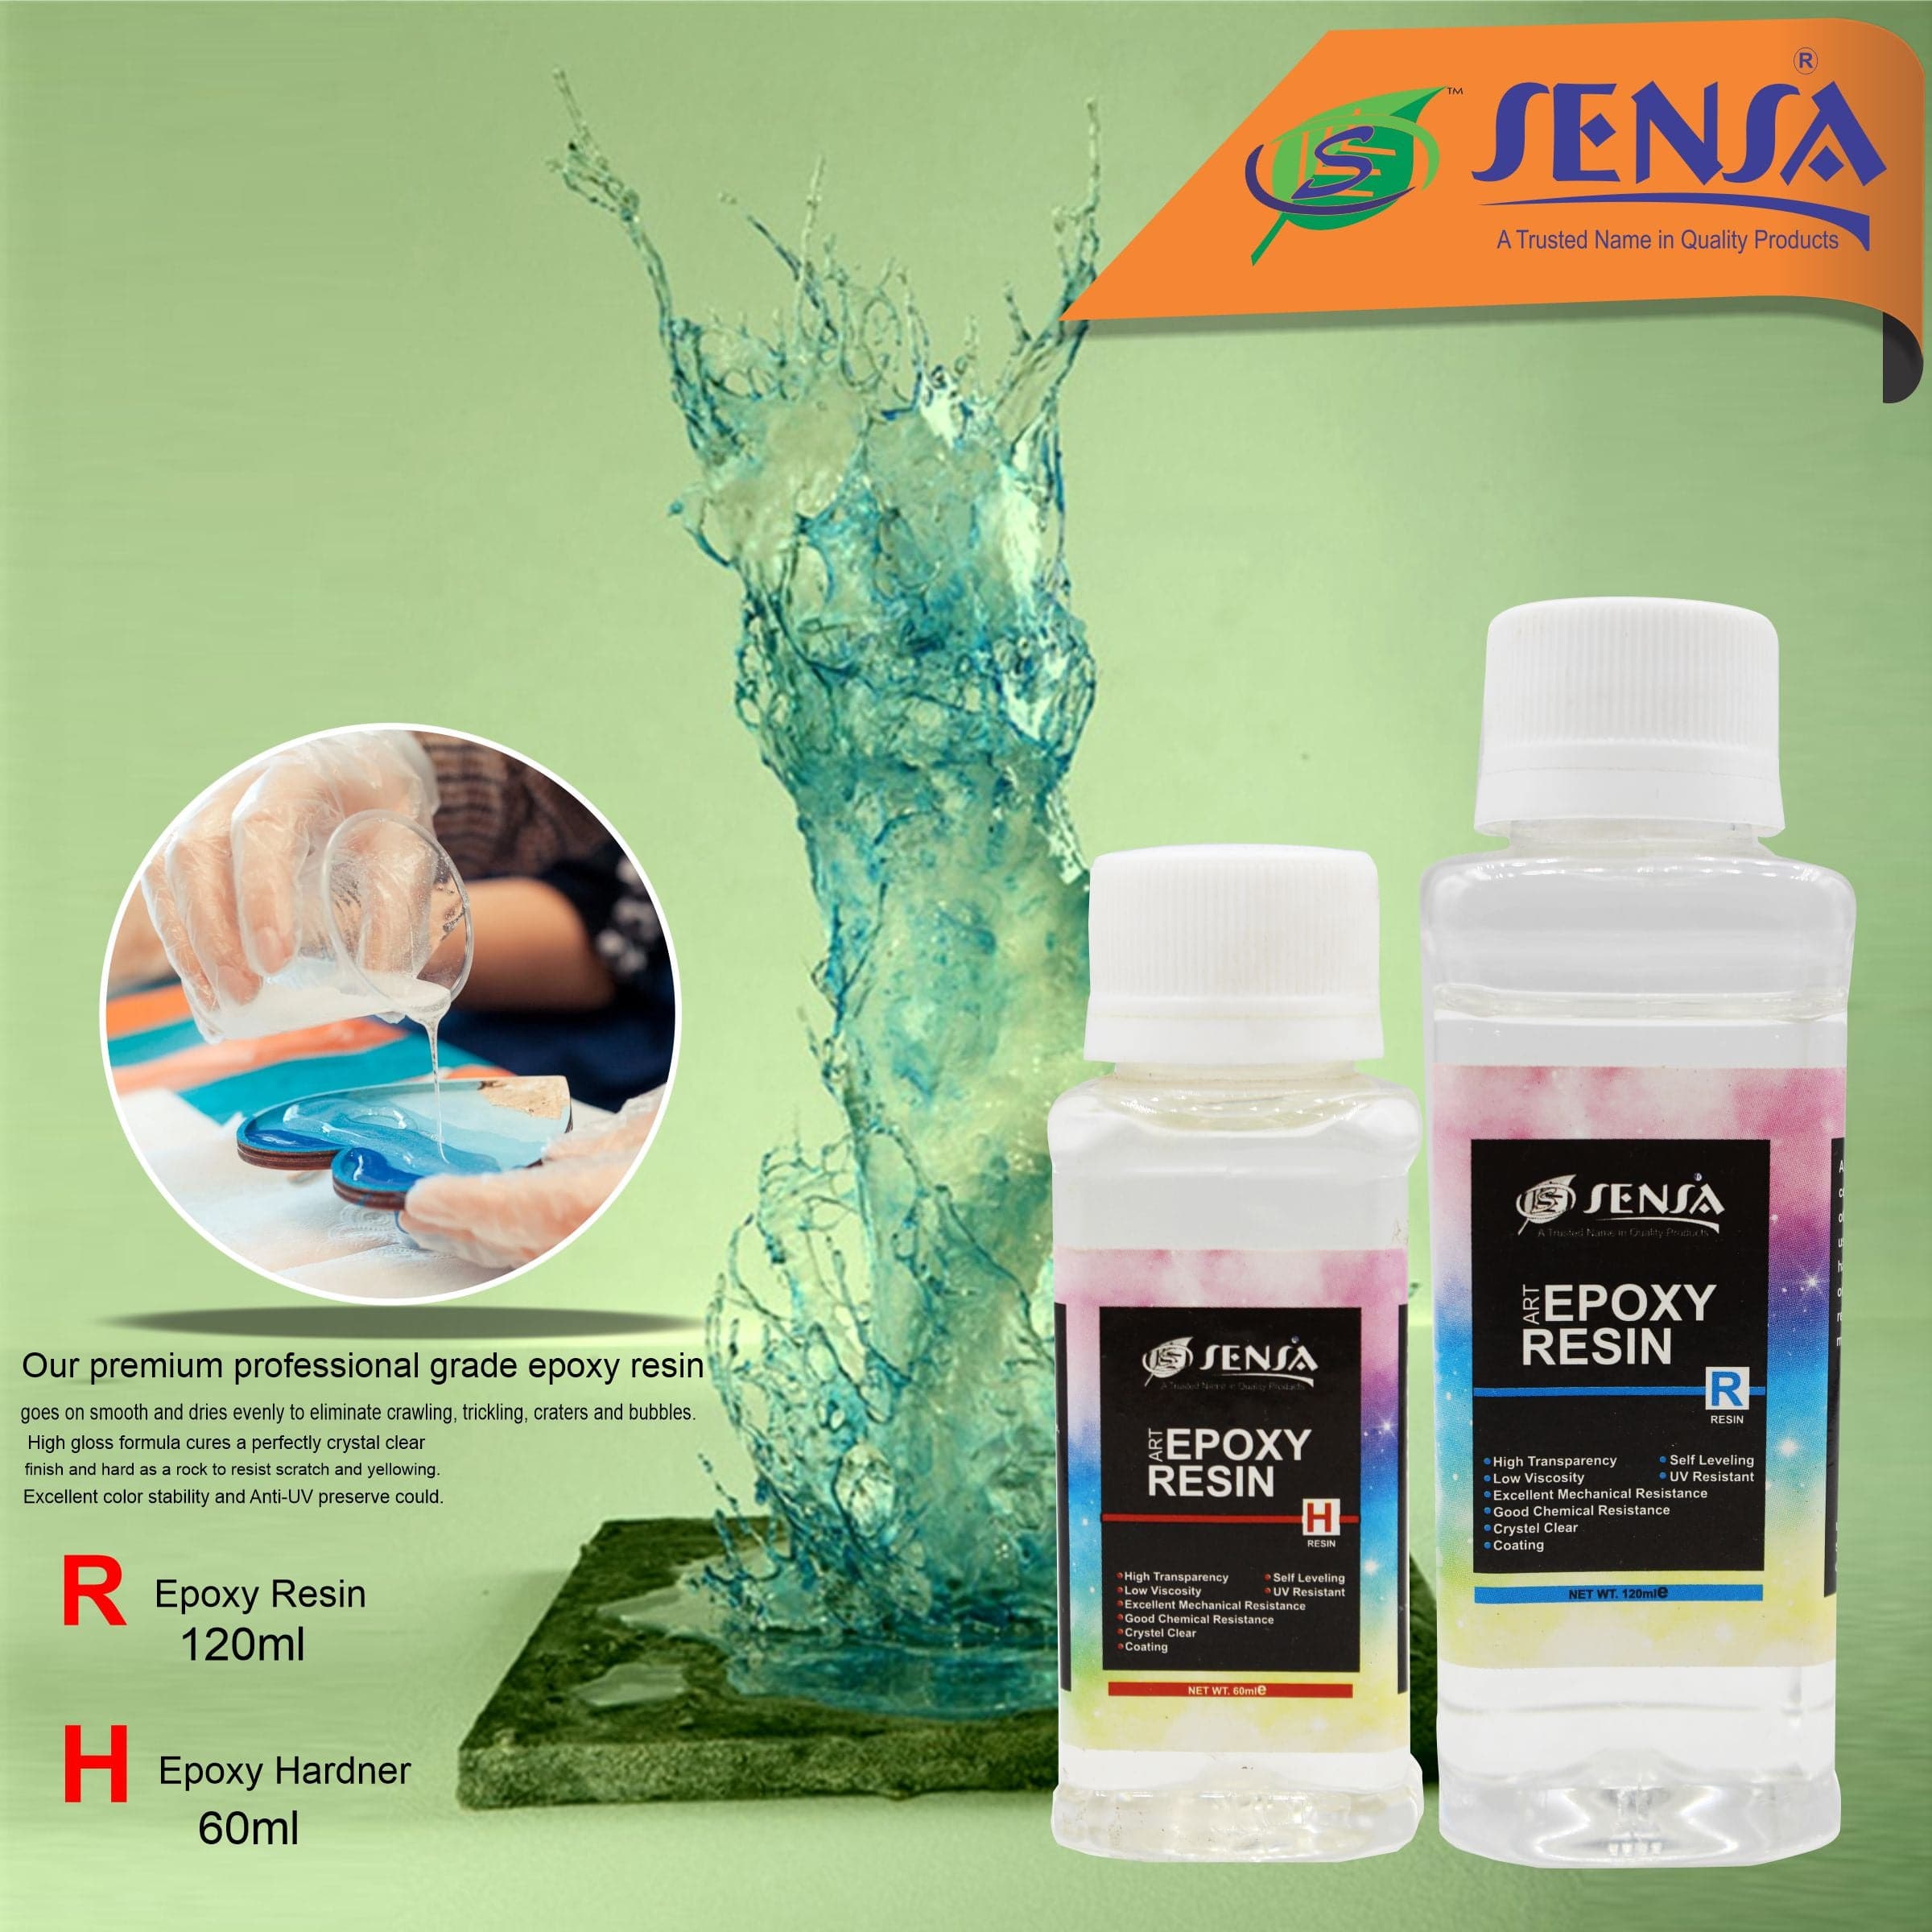 Buy Quality Resin and Epoxy Products in Pakistan - Best Prices!